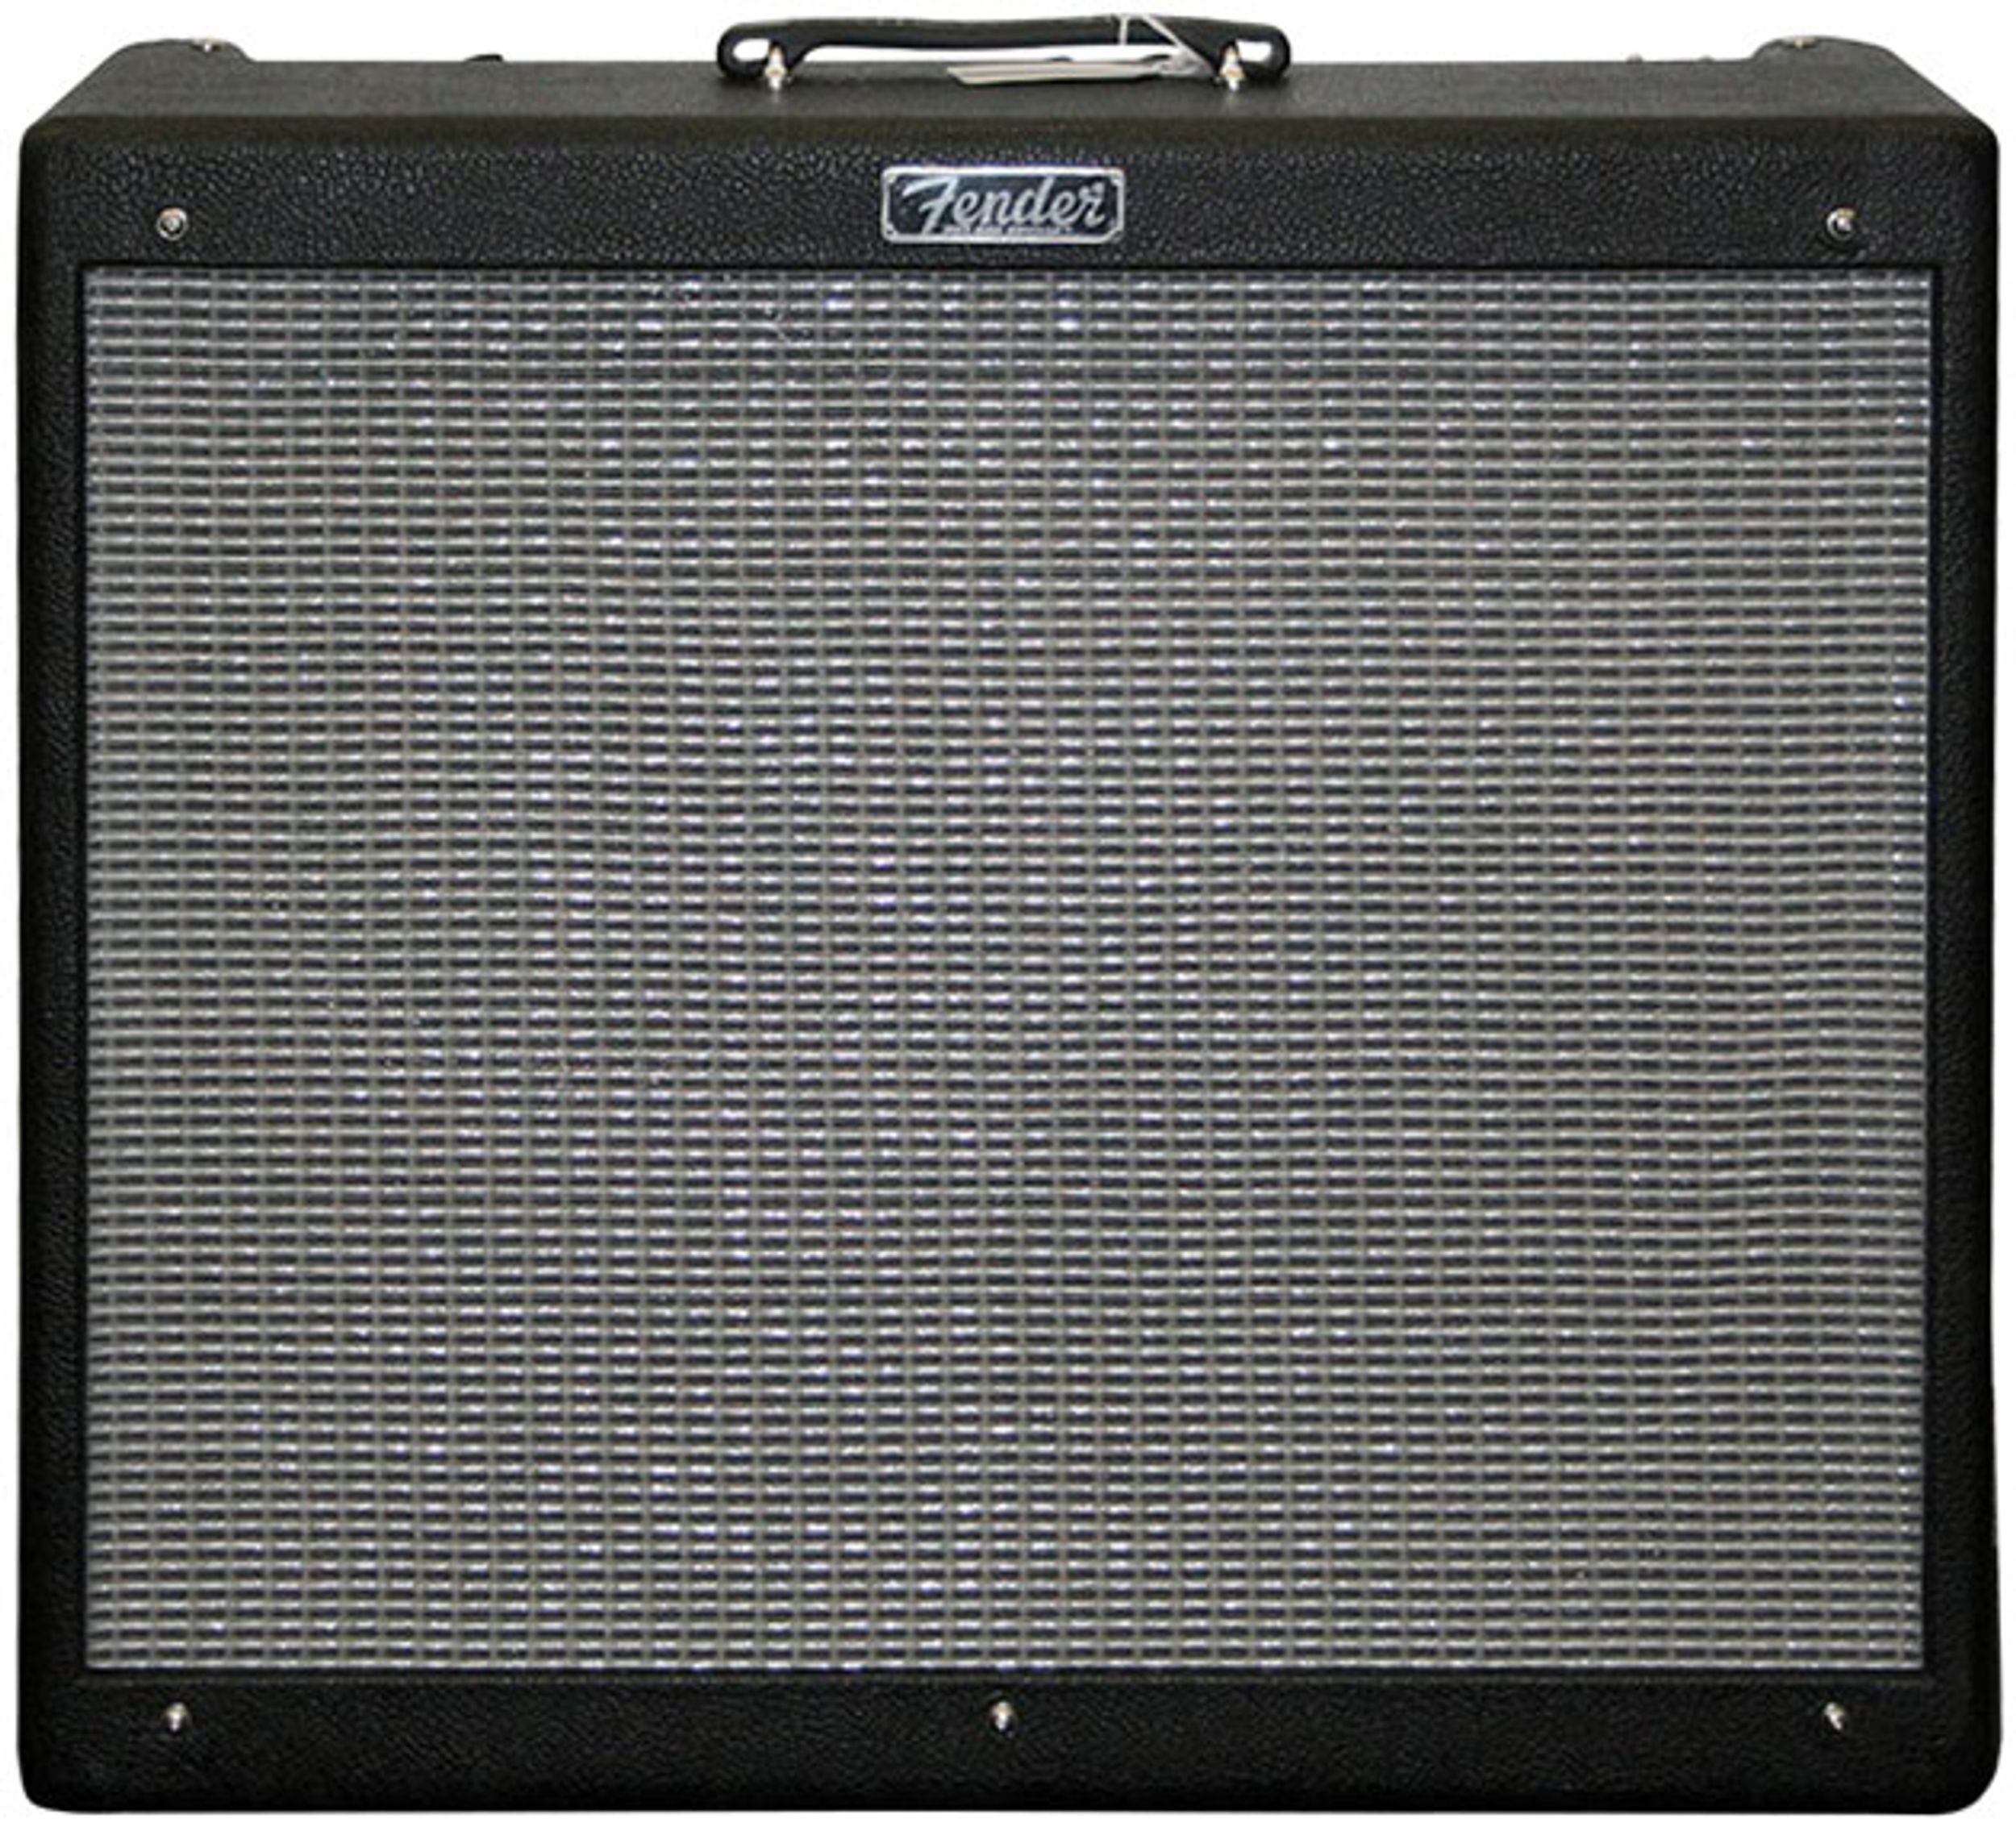 Ask Amp Man: Reducing the Bass on a Fender DeVille